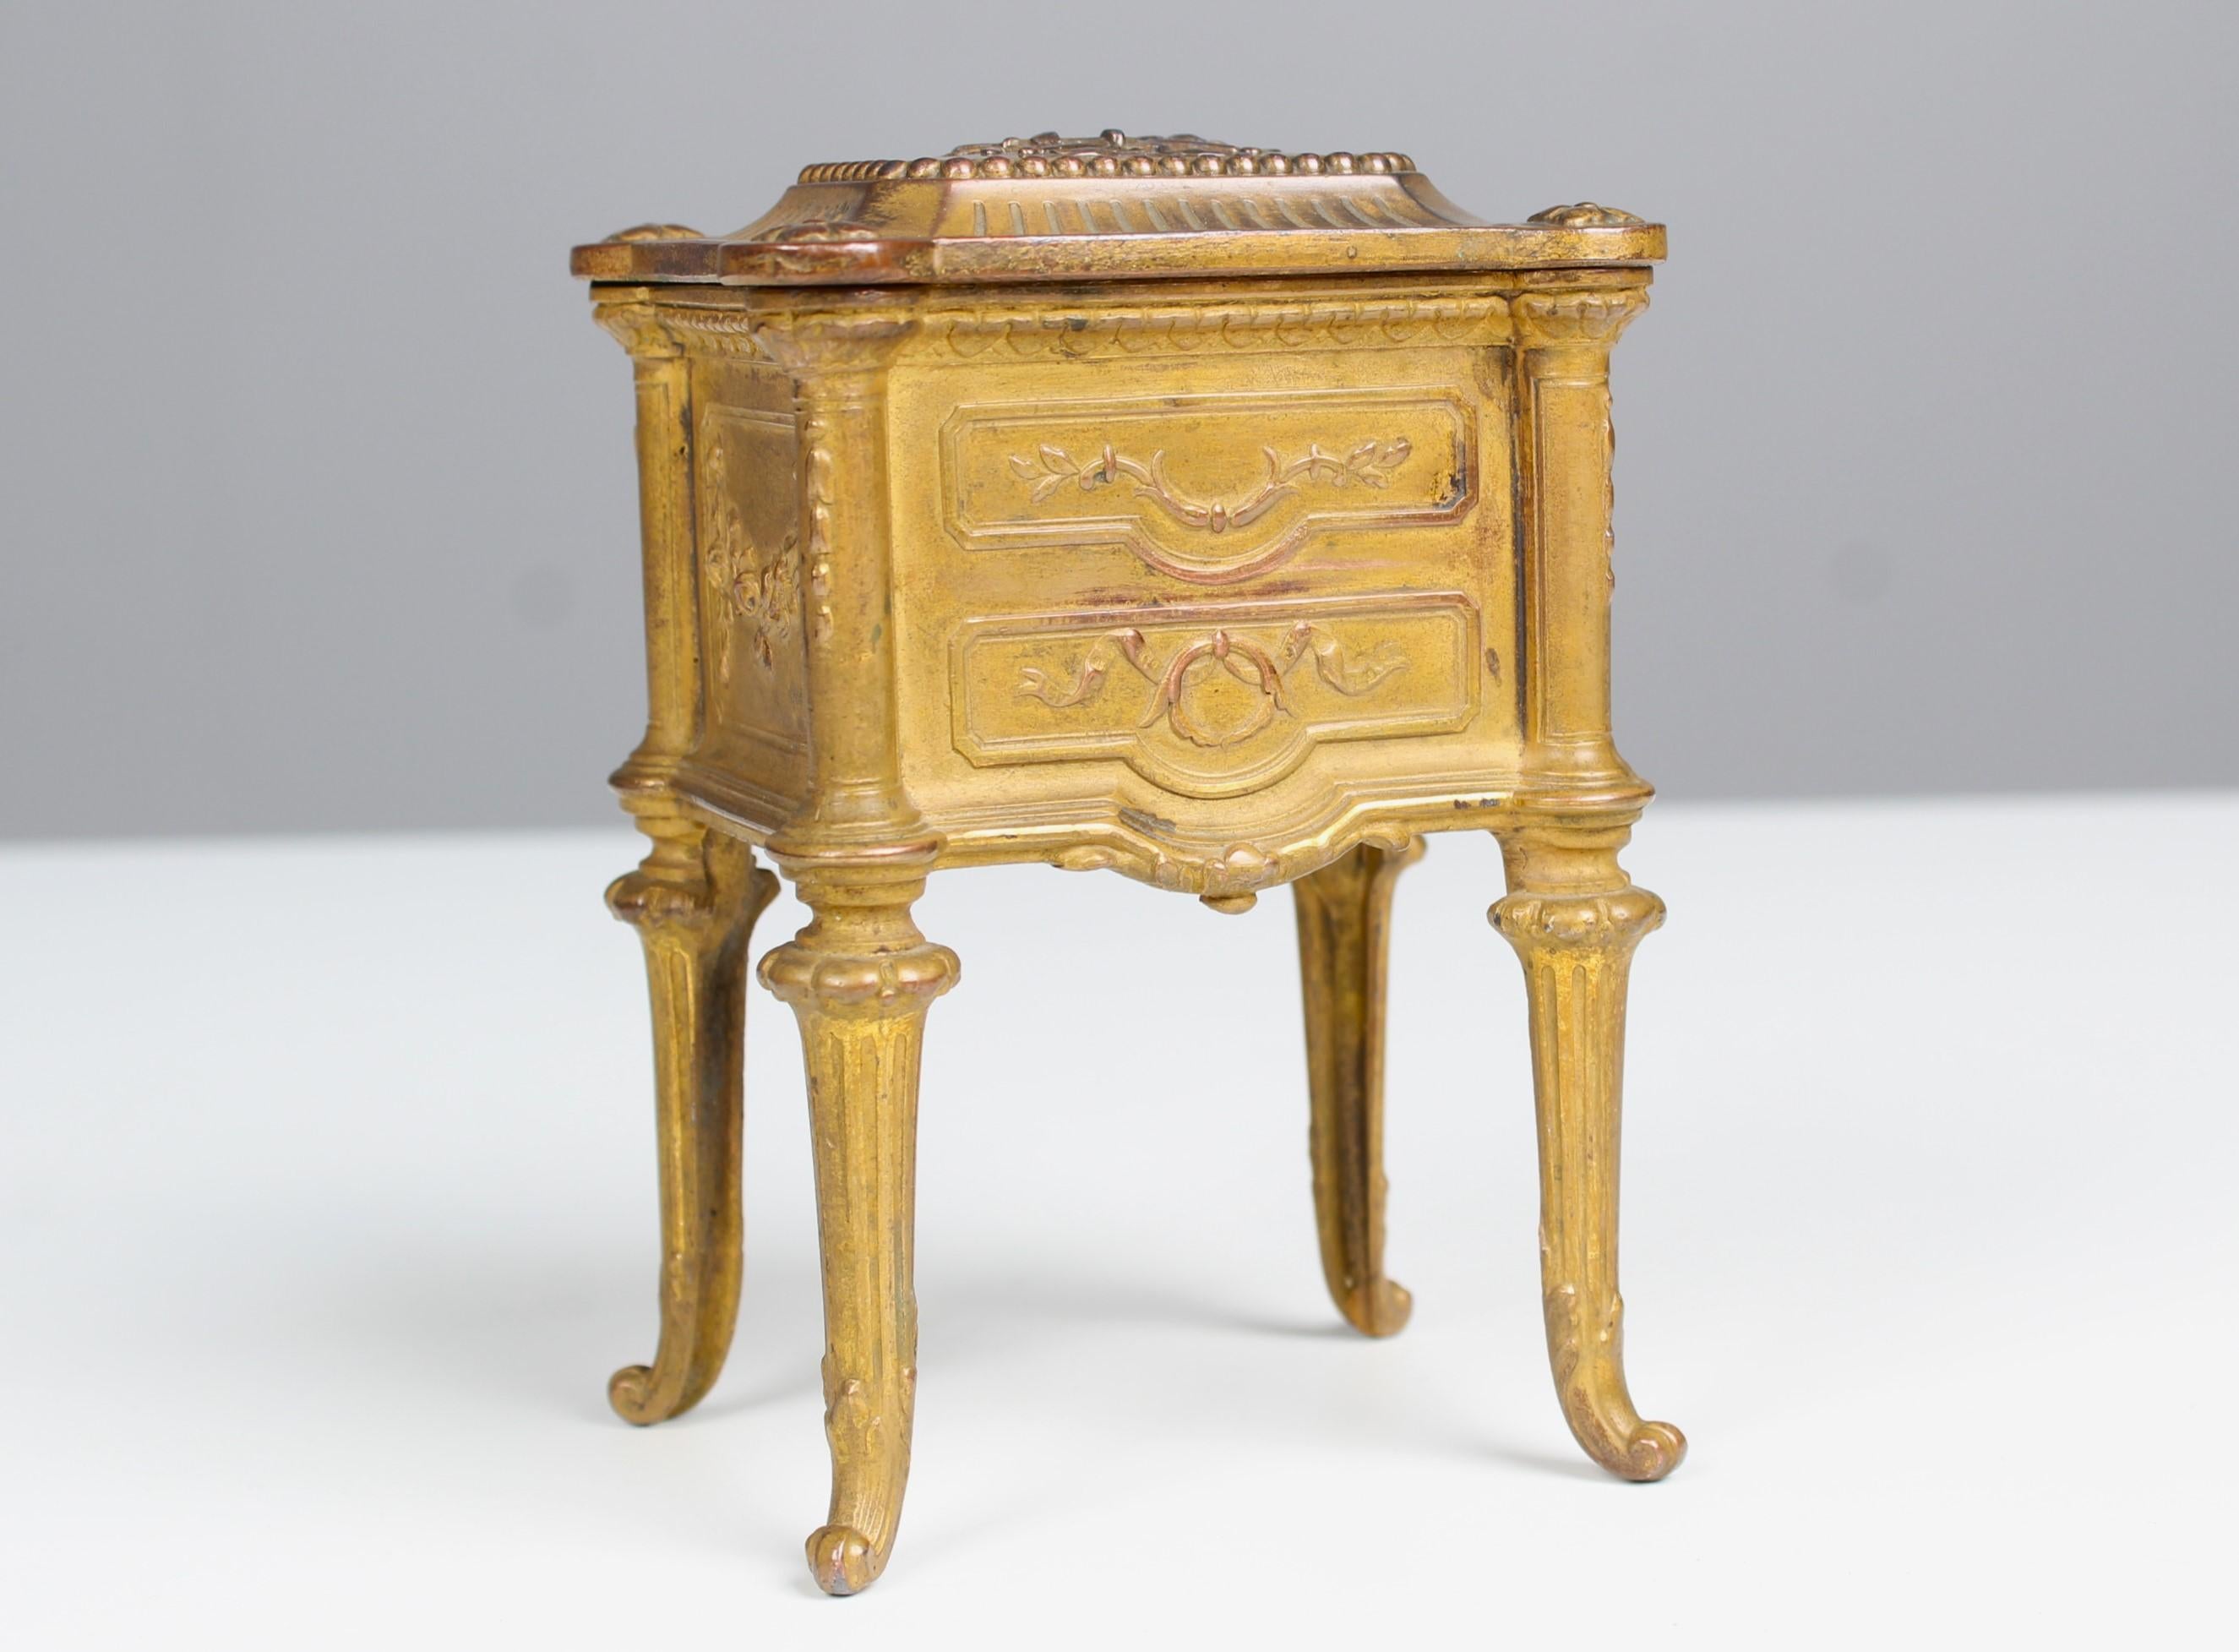 Wonderful antique jewelry box from France, circa 1900.
Lined with beige fabric in a good condition.




